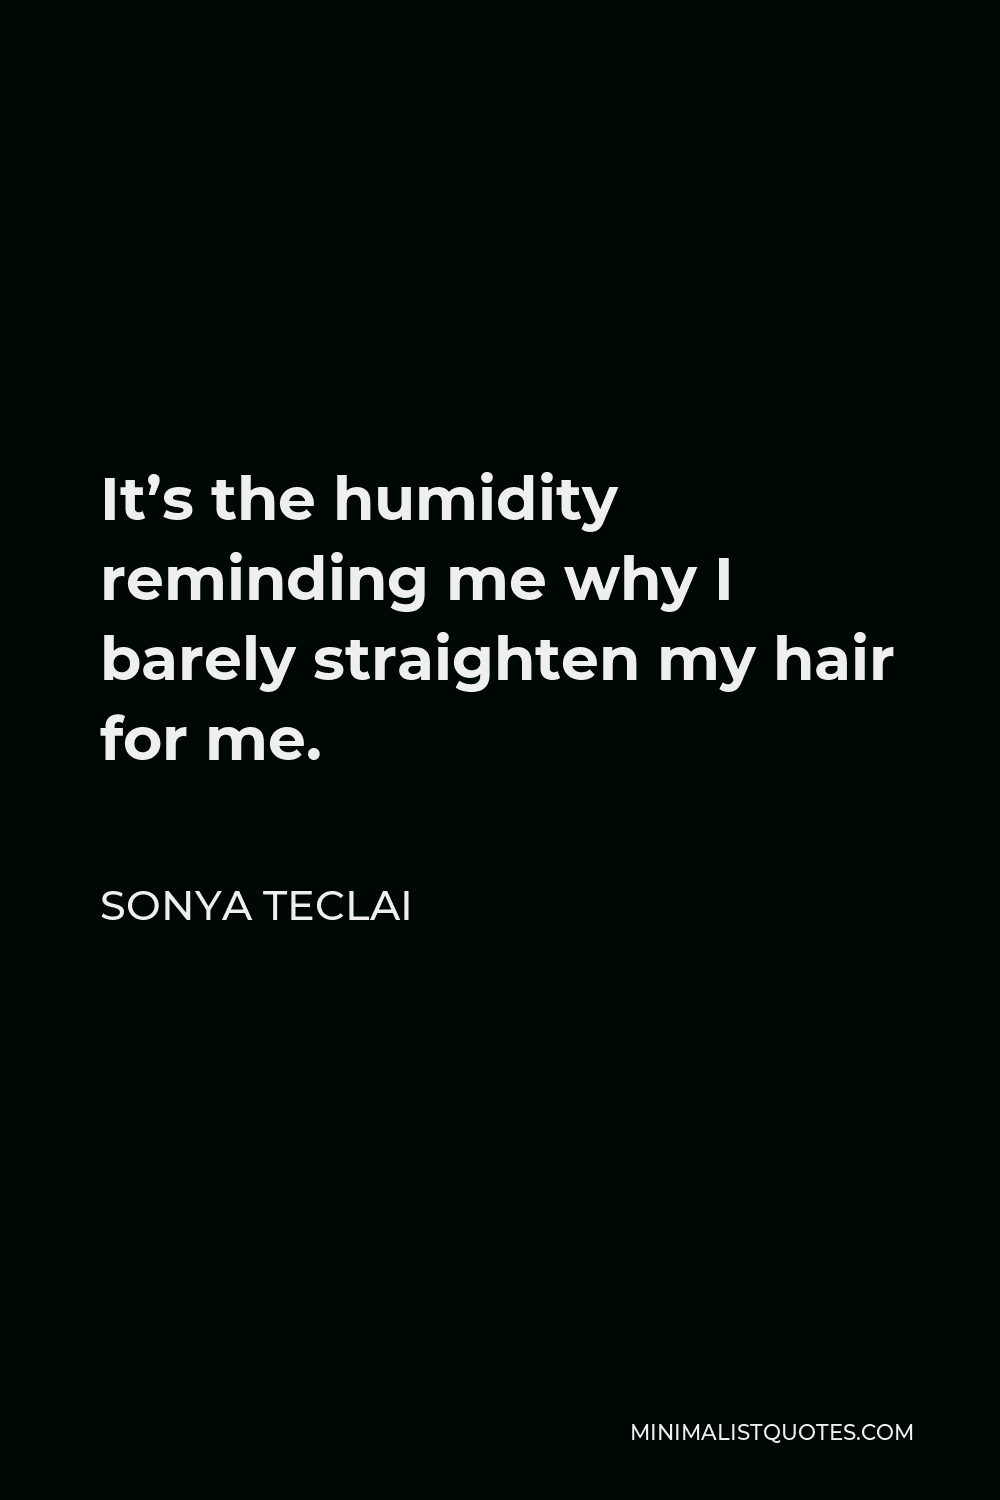 Sonya Teclai Quote - It’s the humidity reminding me why I barely straighten my hair for me.